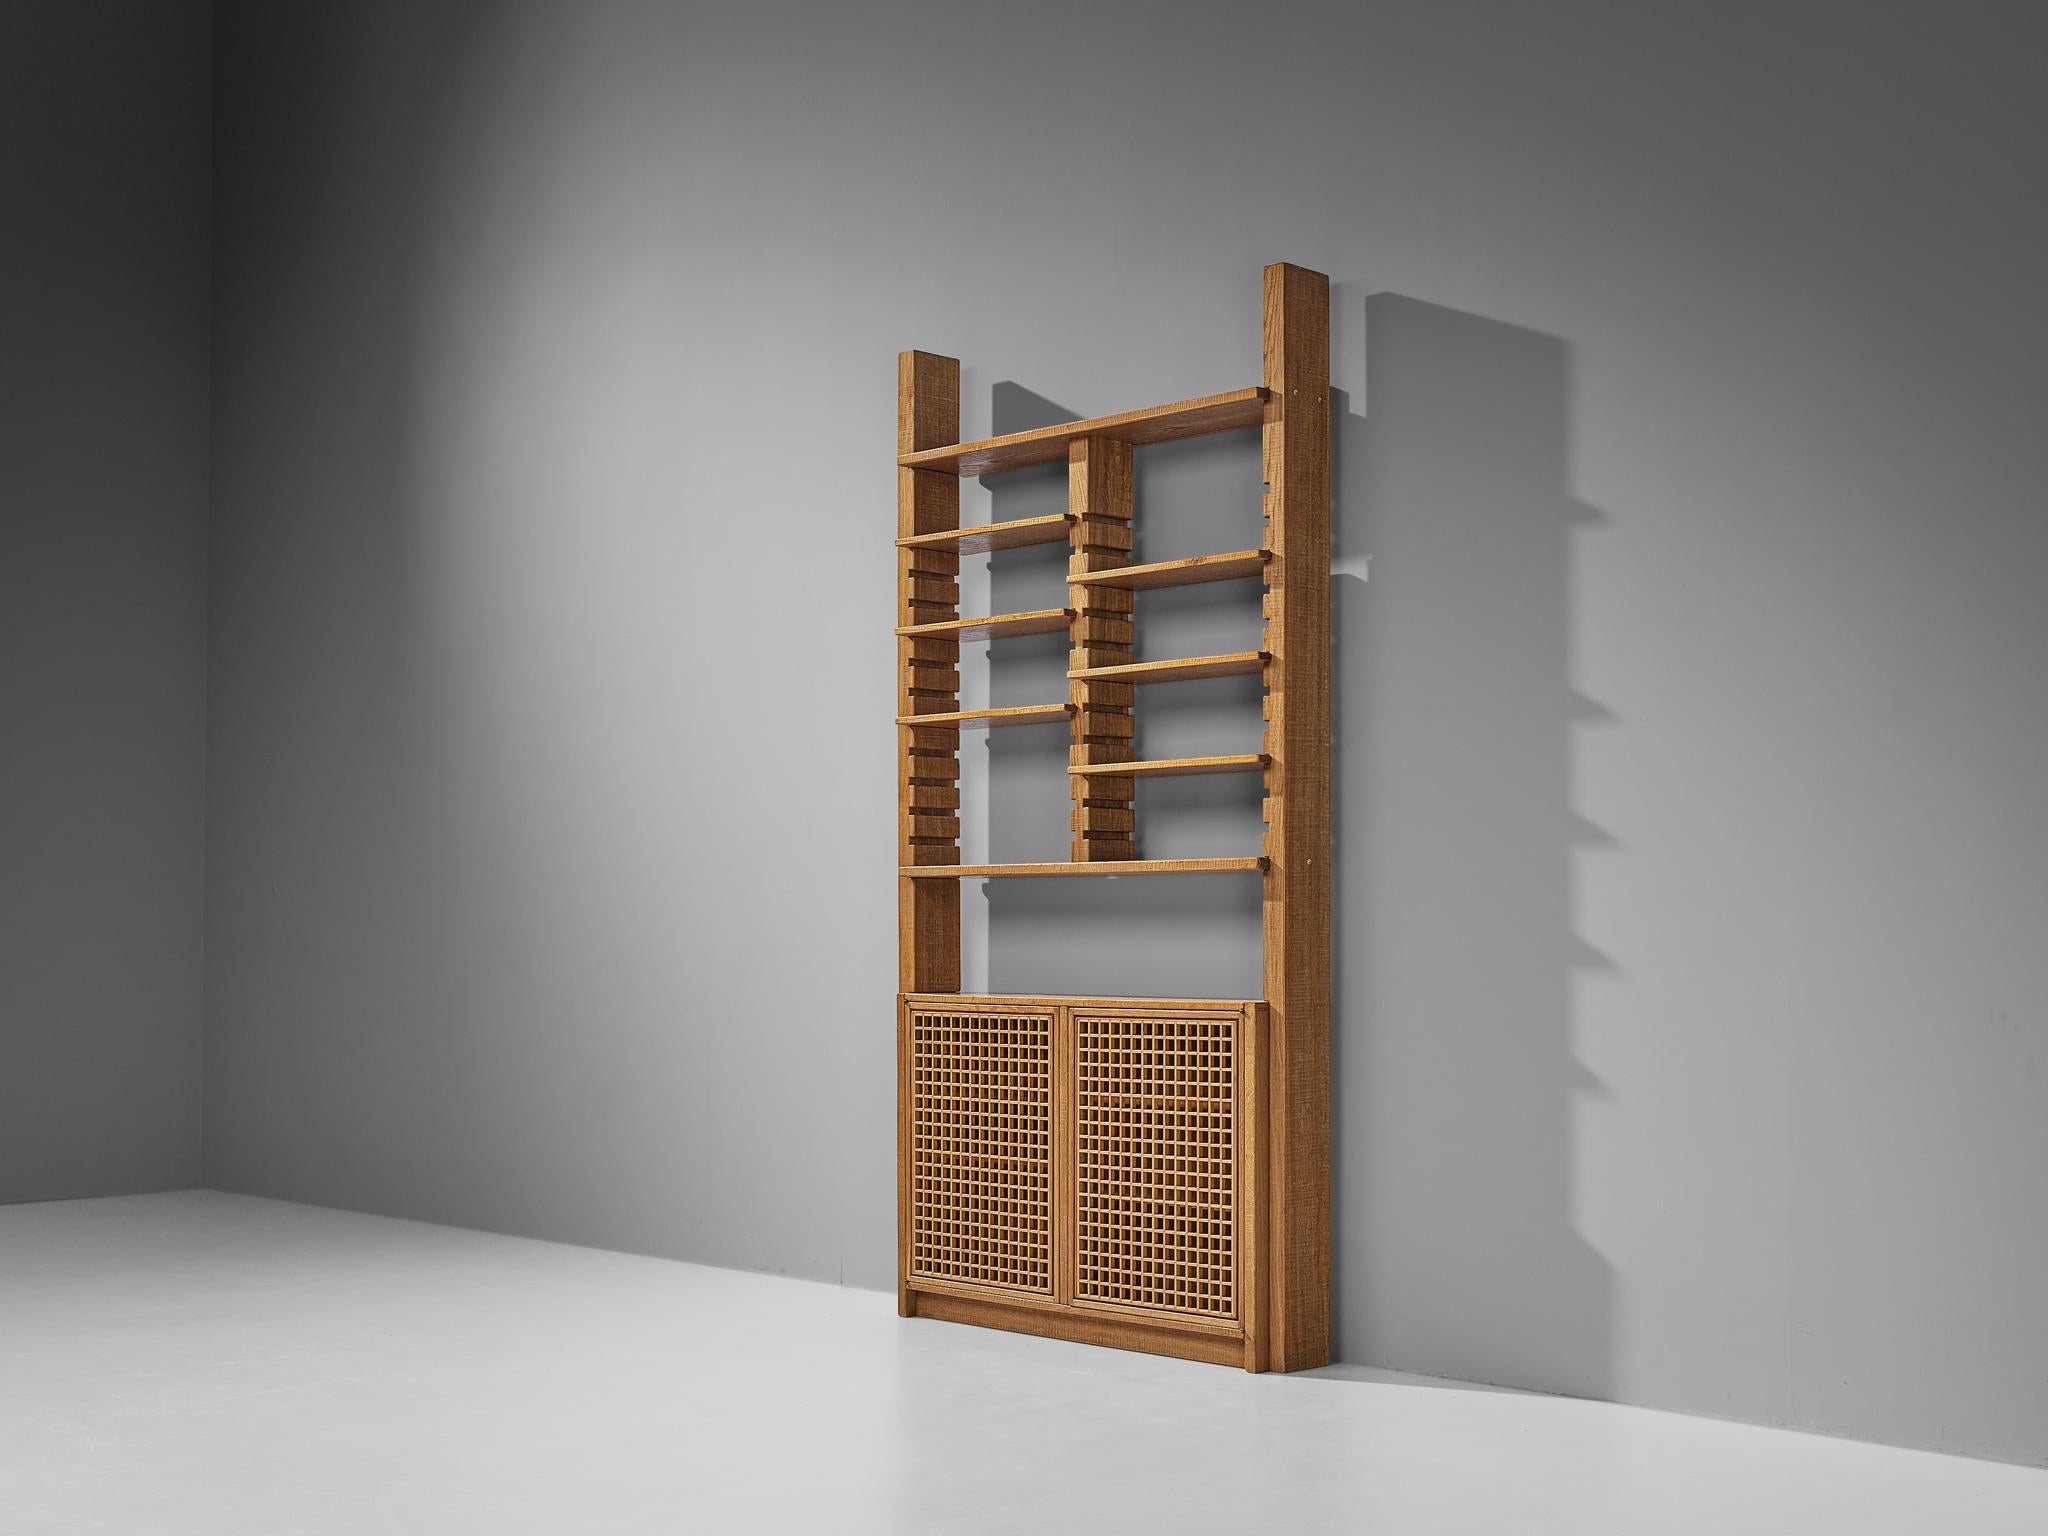 Giuseppe Rivadossi for Officina Rivadossi, library or highboard, oak, Italy, 1980s

An exceptional wall unit by the Italian sculptor and designer Giuseppe Rivadossi, featuring a high-level of craftsmanship in woodwork. There are two cabinets